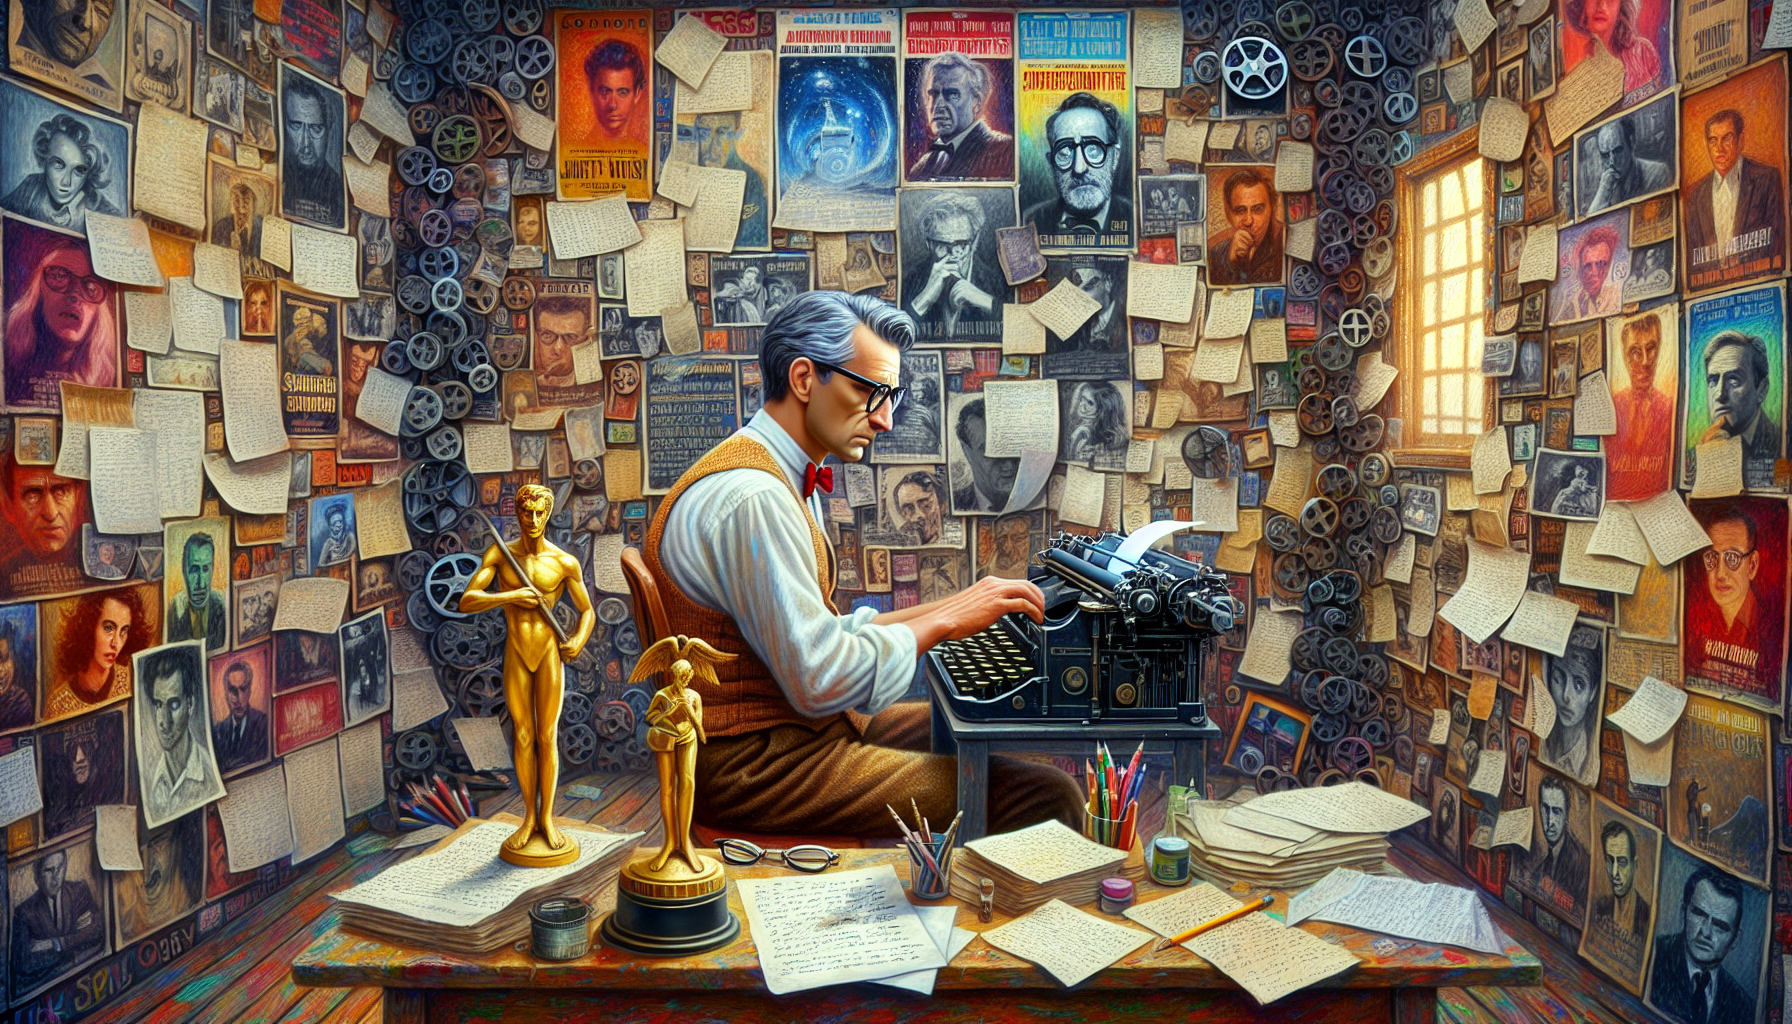 An imaginative writer's room with walls covered in film posters and screenplay drafts, featuring a middle-aged man resembling Peter Morgan thoughtfully typing on an old typewriter amidst scattered not